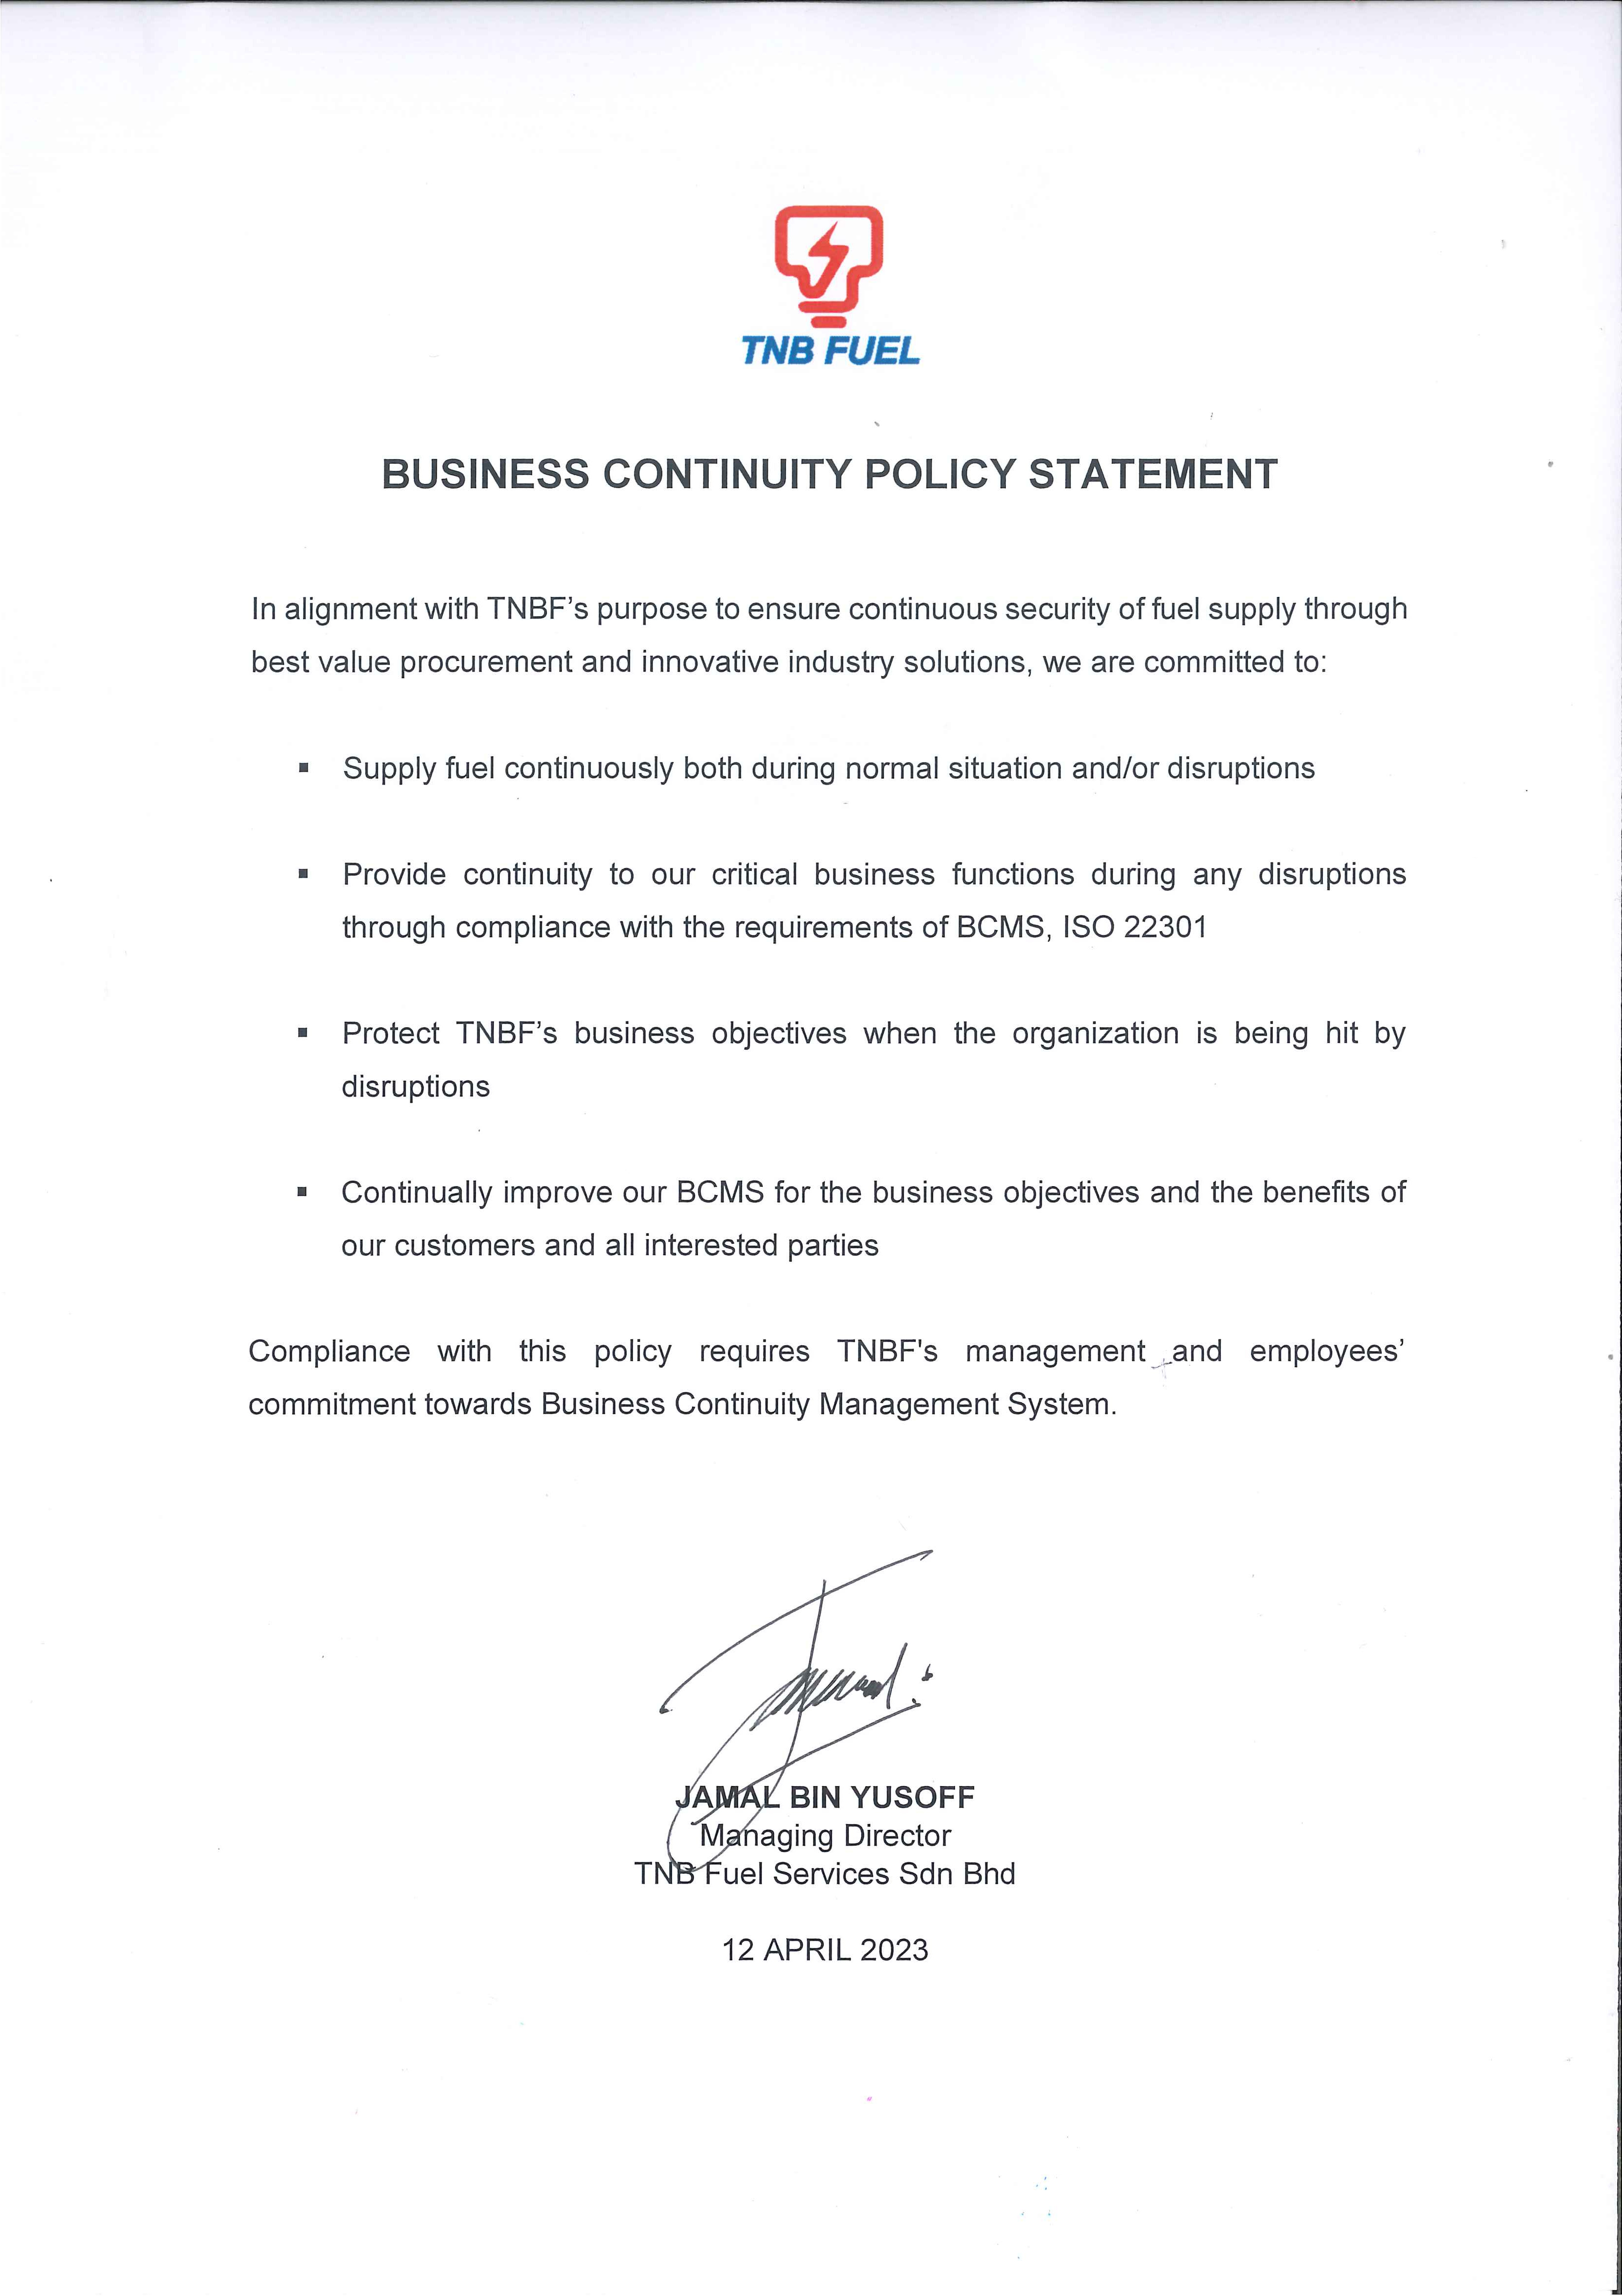 Business Continuity Policy Statement